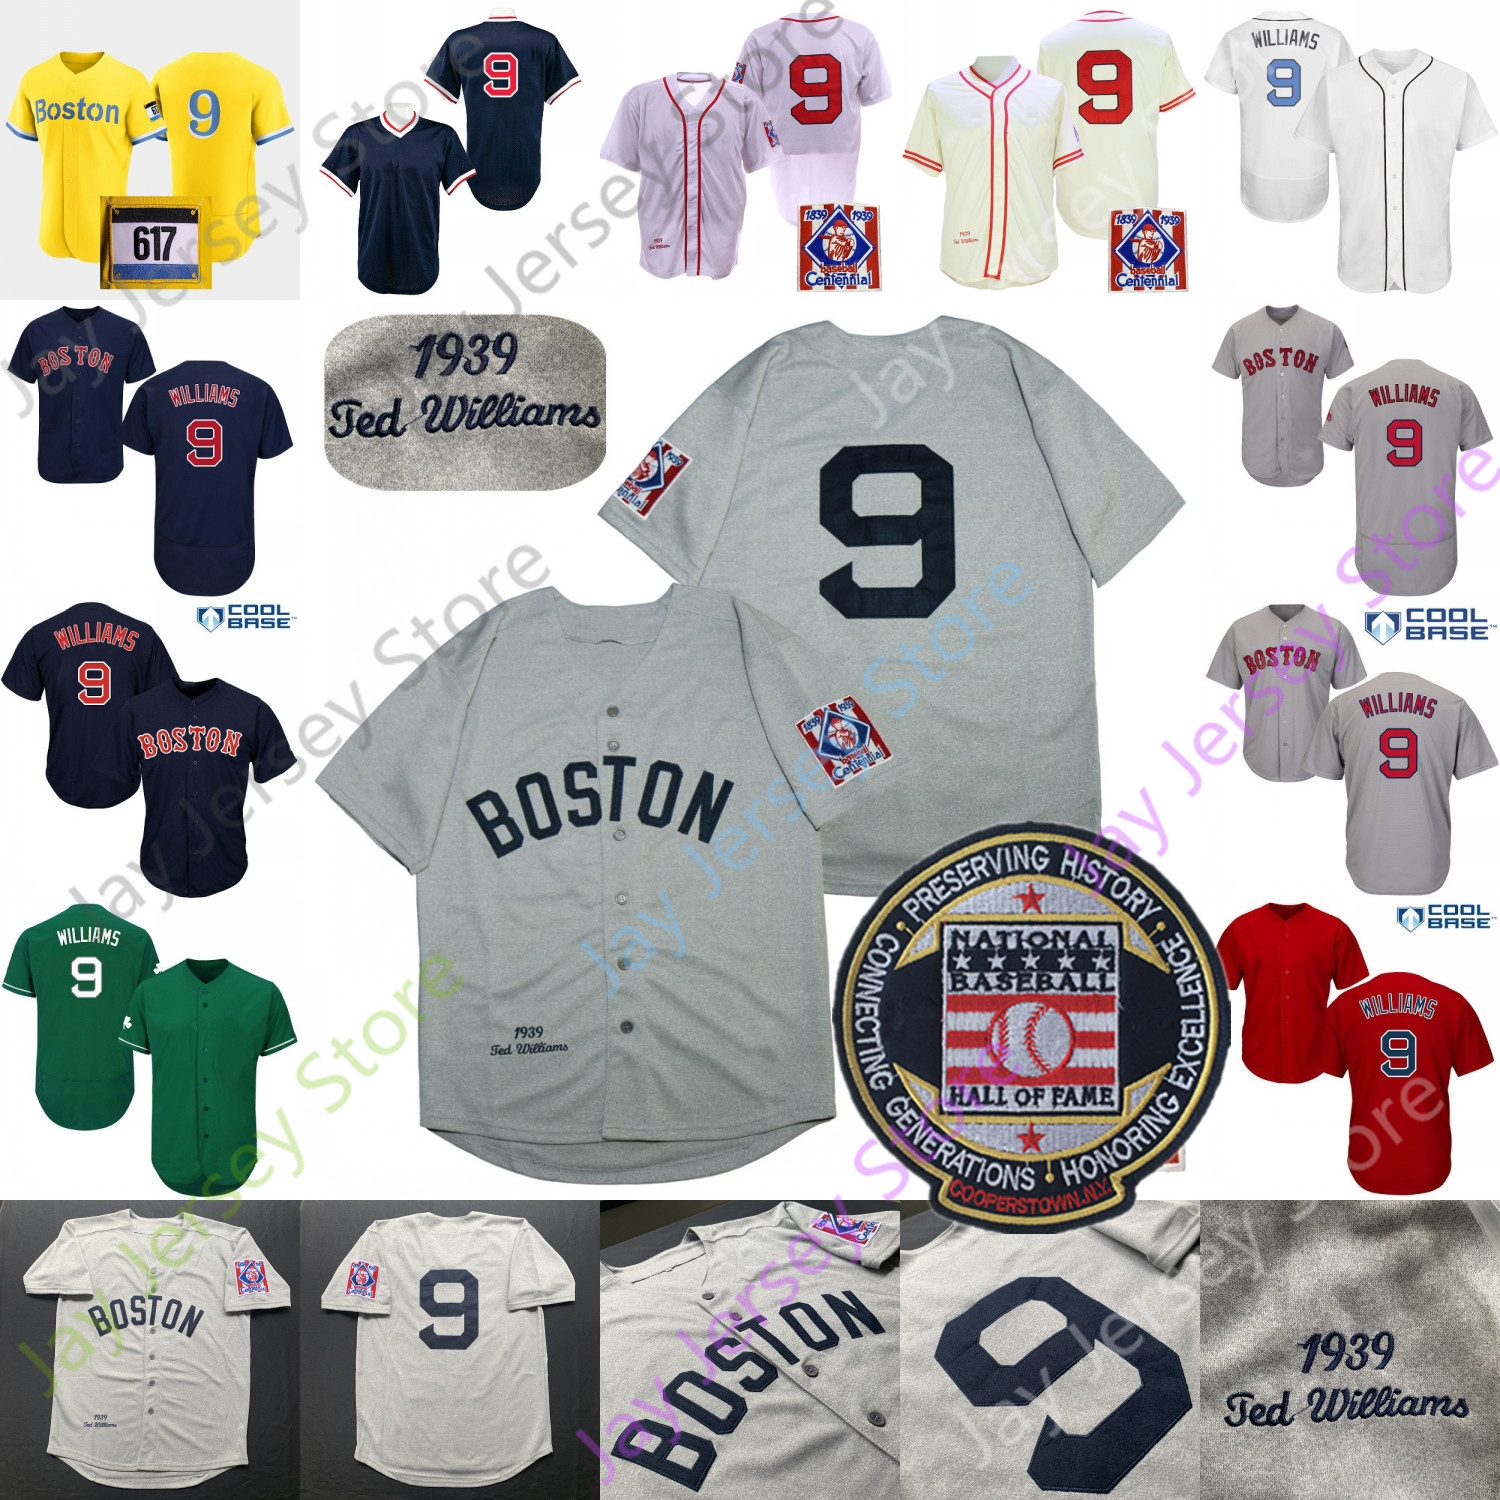 Ted Williams Jersey 1939 Biały Szary Krem Cooperstown 2021 Miasto Connect Player Ojcowie Day Salute to Service Navy Red Green Size S-3XL Dorosły